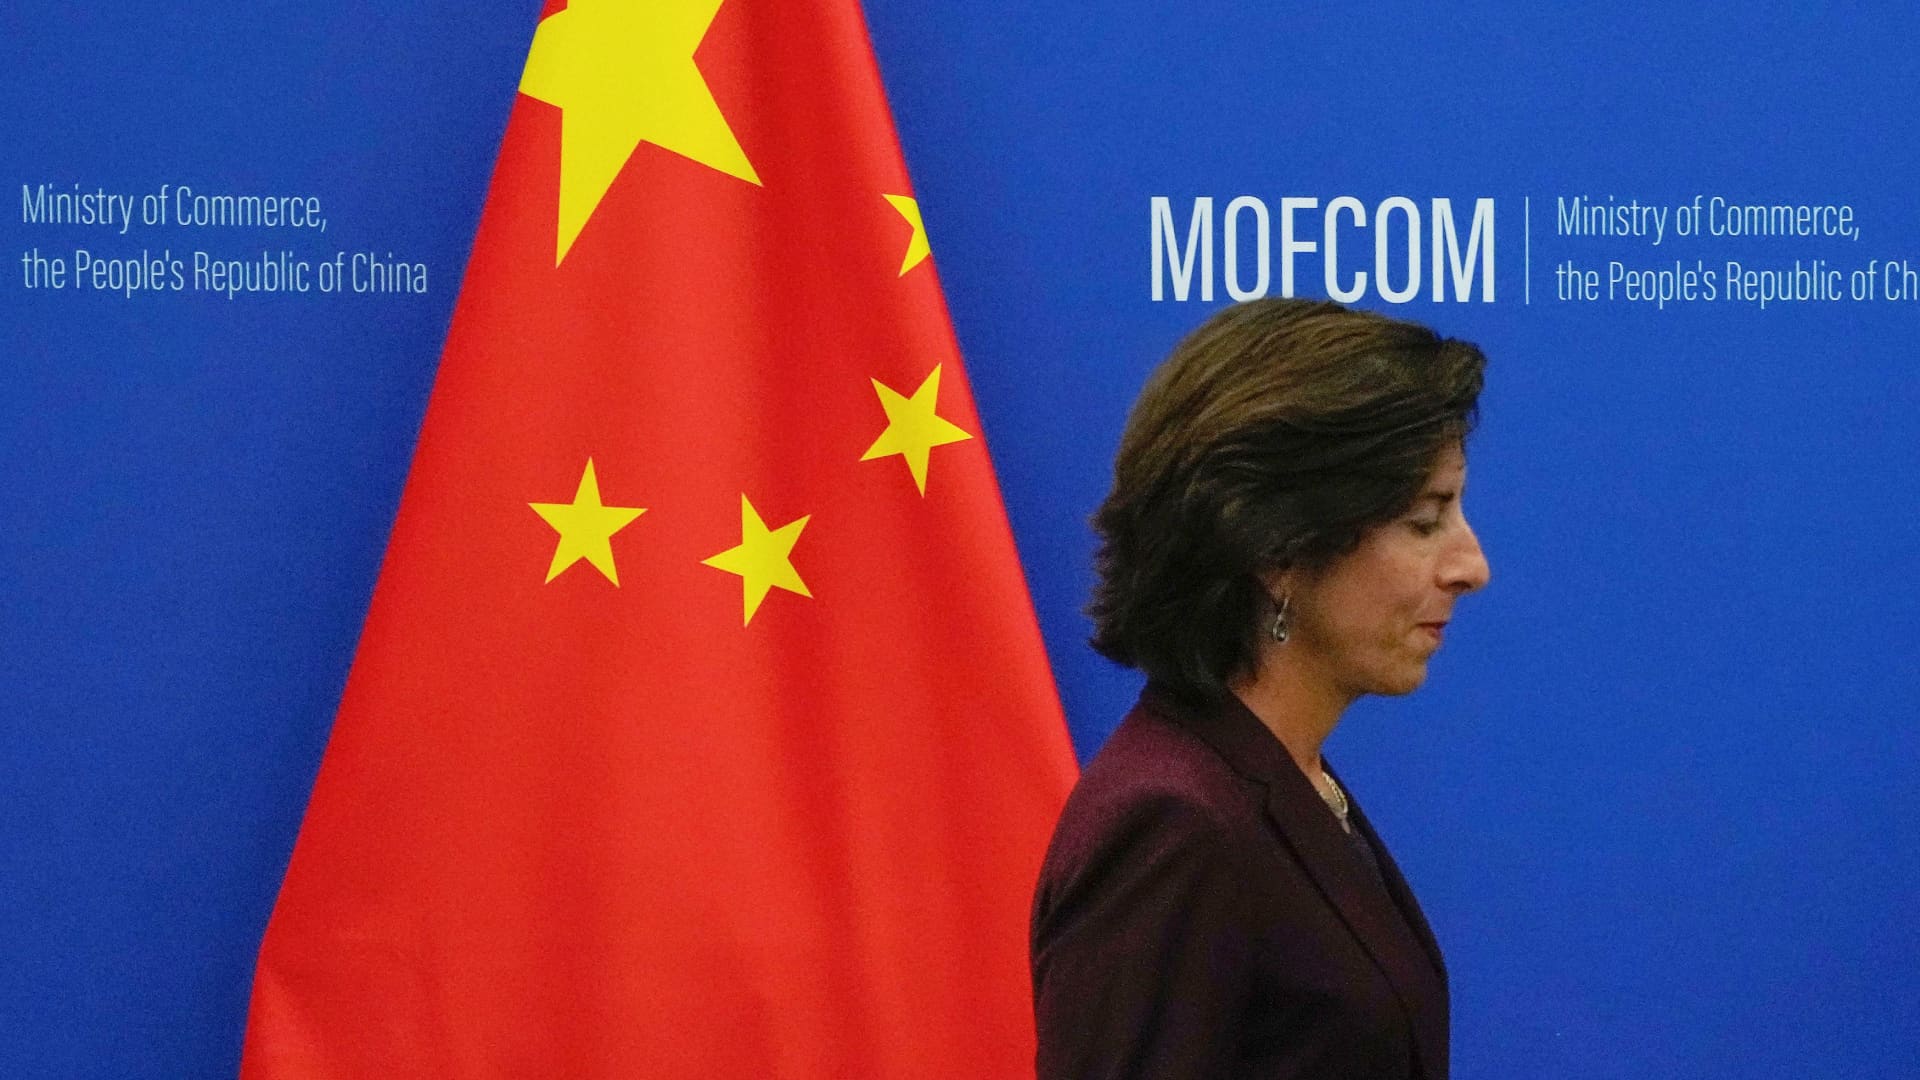 U.S. Commerce Secretary Gina Raimondo says she “didn’t pull any punches” during recent visit to China